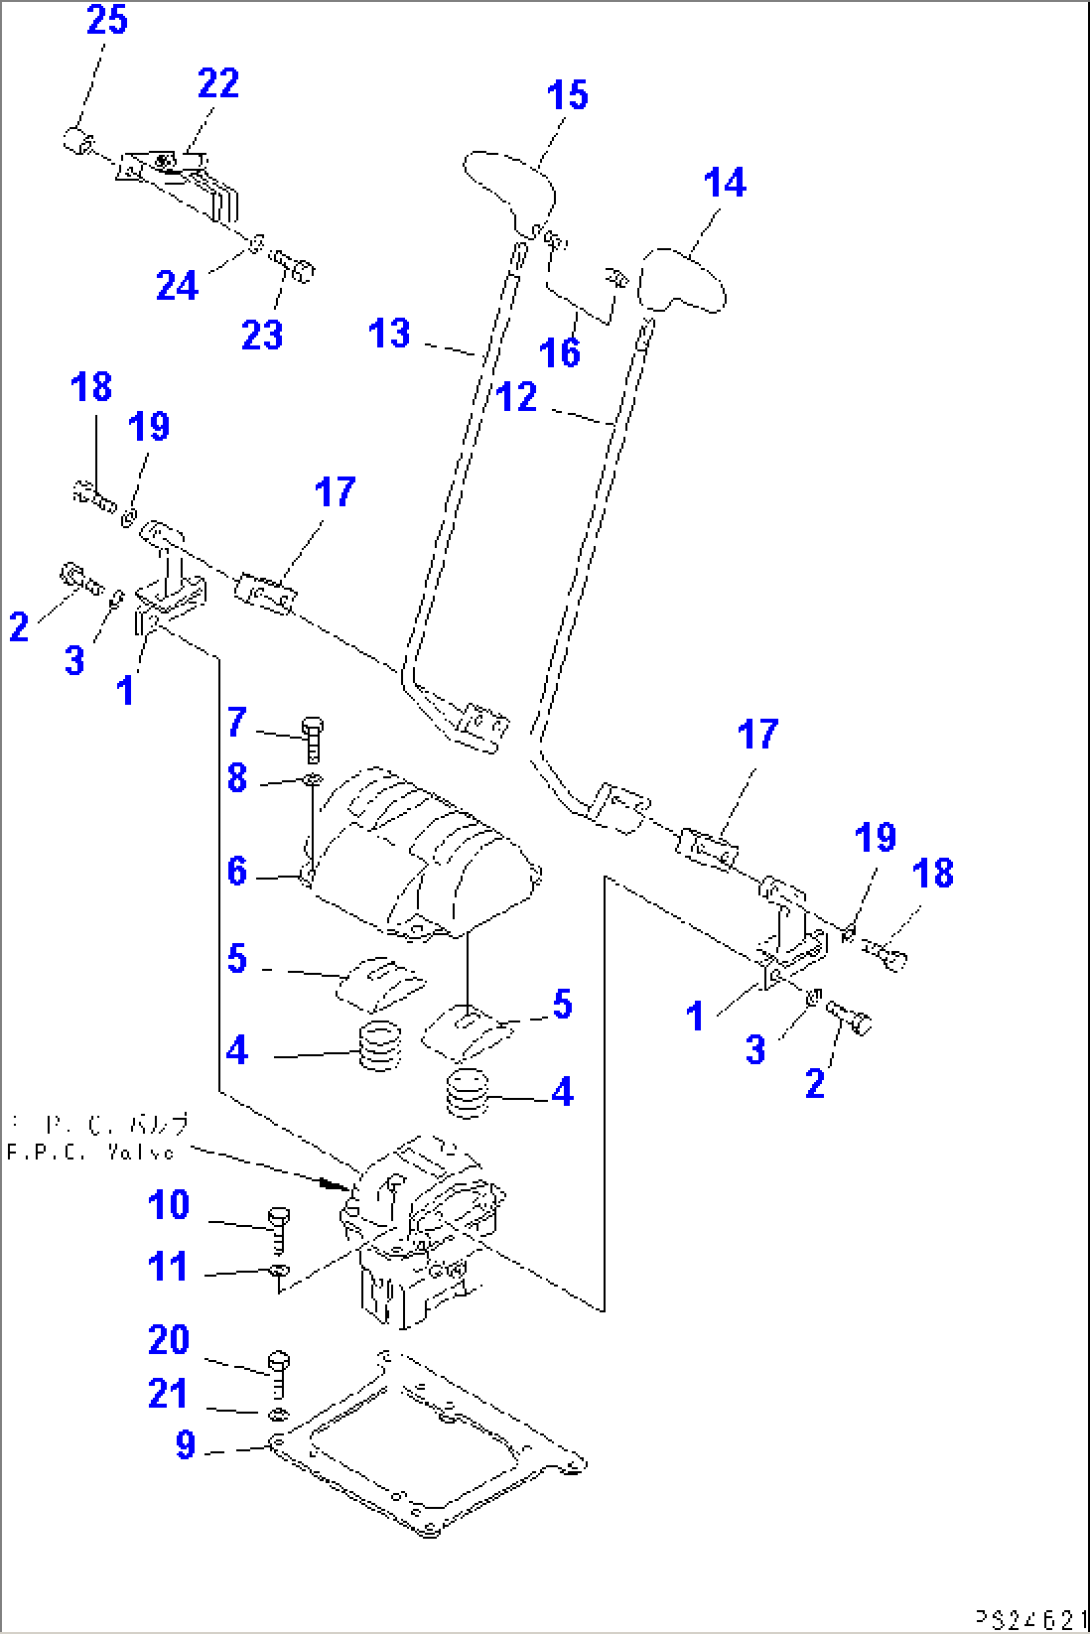 TRAVEL CONTROL LEVER AND LINKAGE(#1033-)